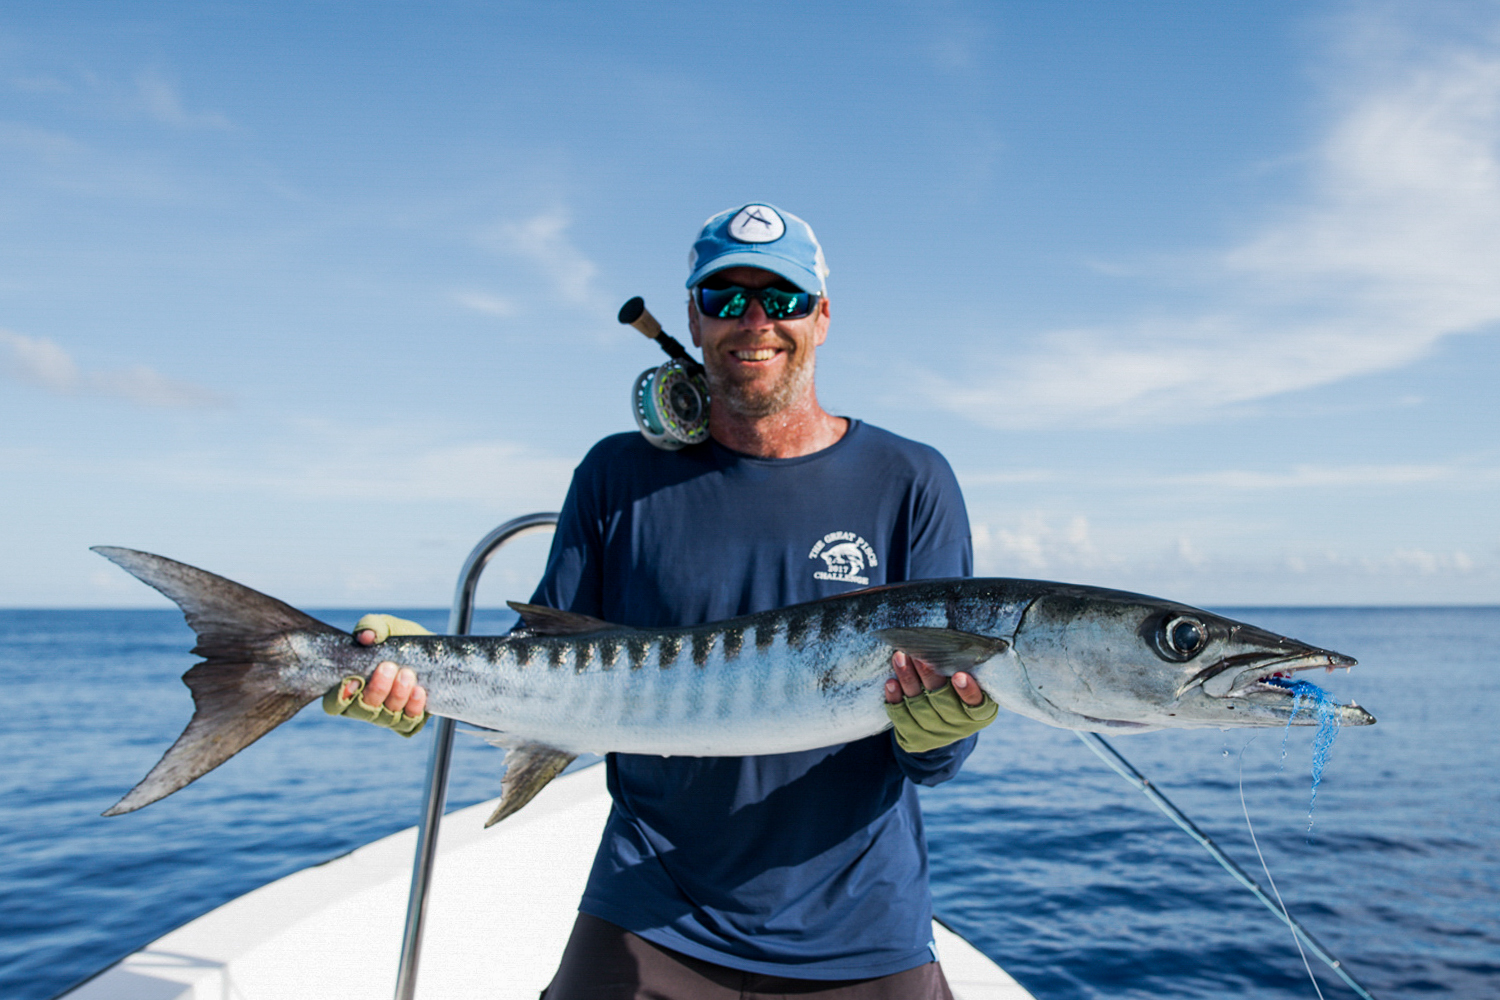 Giant WAHOO! Best How To (Catch Clean Cook) Fastest Catch Ever